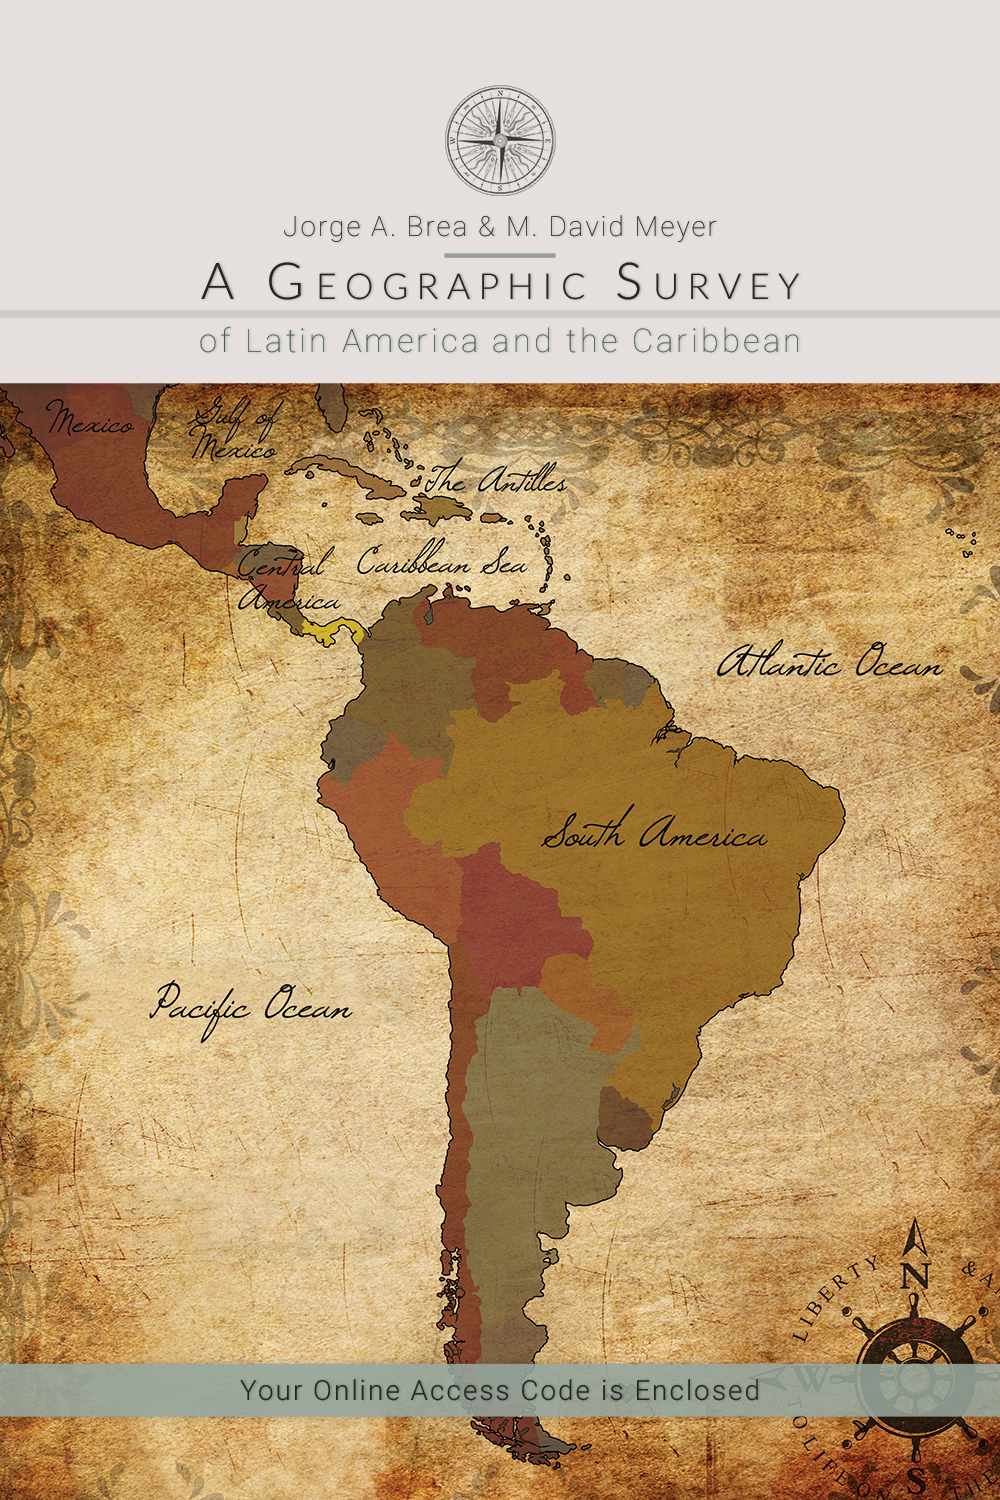 A Geographic Survey of Latin America and the Caribbean: Jorge A. Brea & Merlin David Meyer